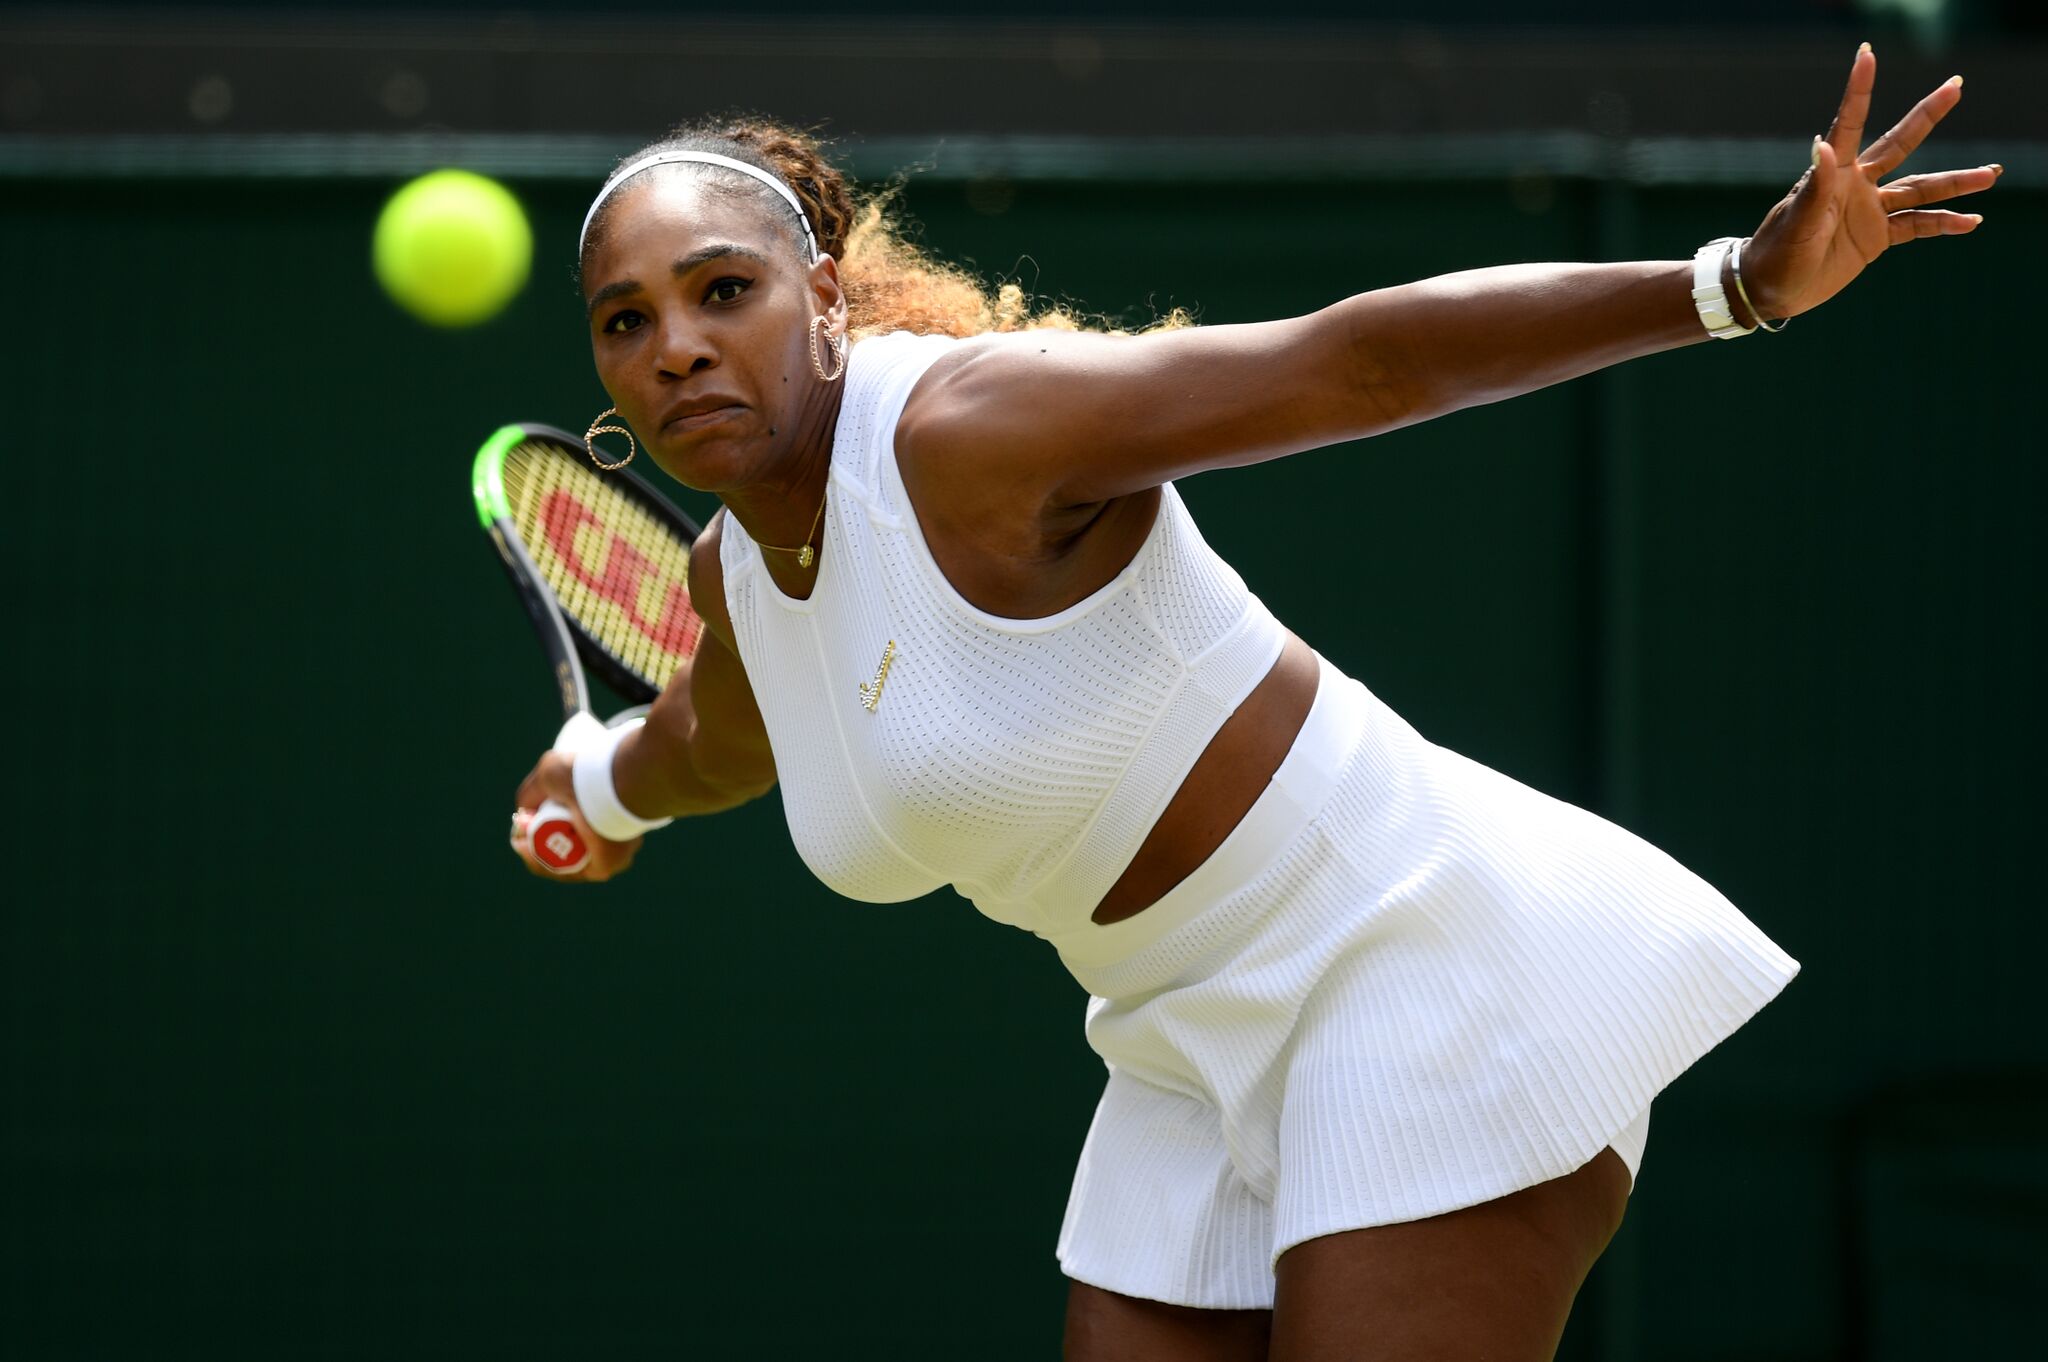 Serena Williams of the United States plays a forehand in her Ladies' Singles fourth round match against Carla Suarez Navarro of Spain during Day Seven of The Championships  | Getty Images